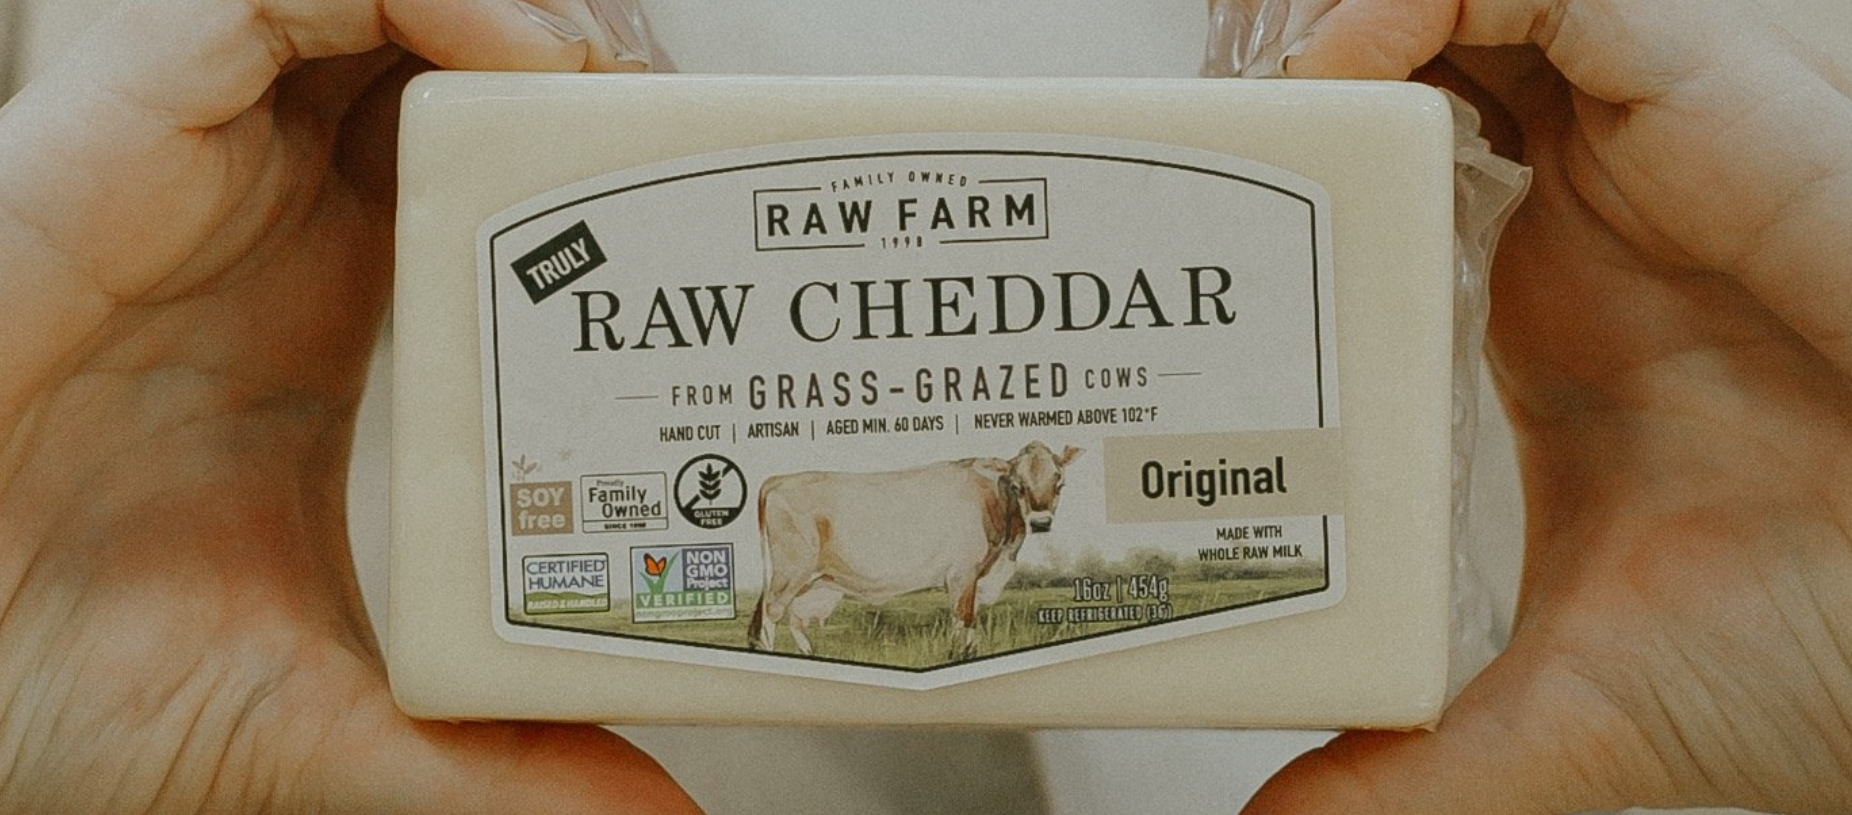 Raw Cheese by Raw Farm Recall Due to E. Coli